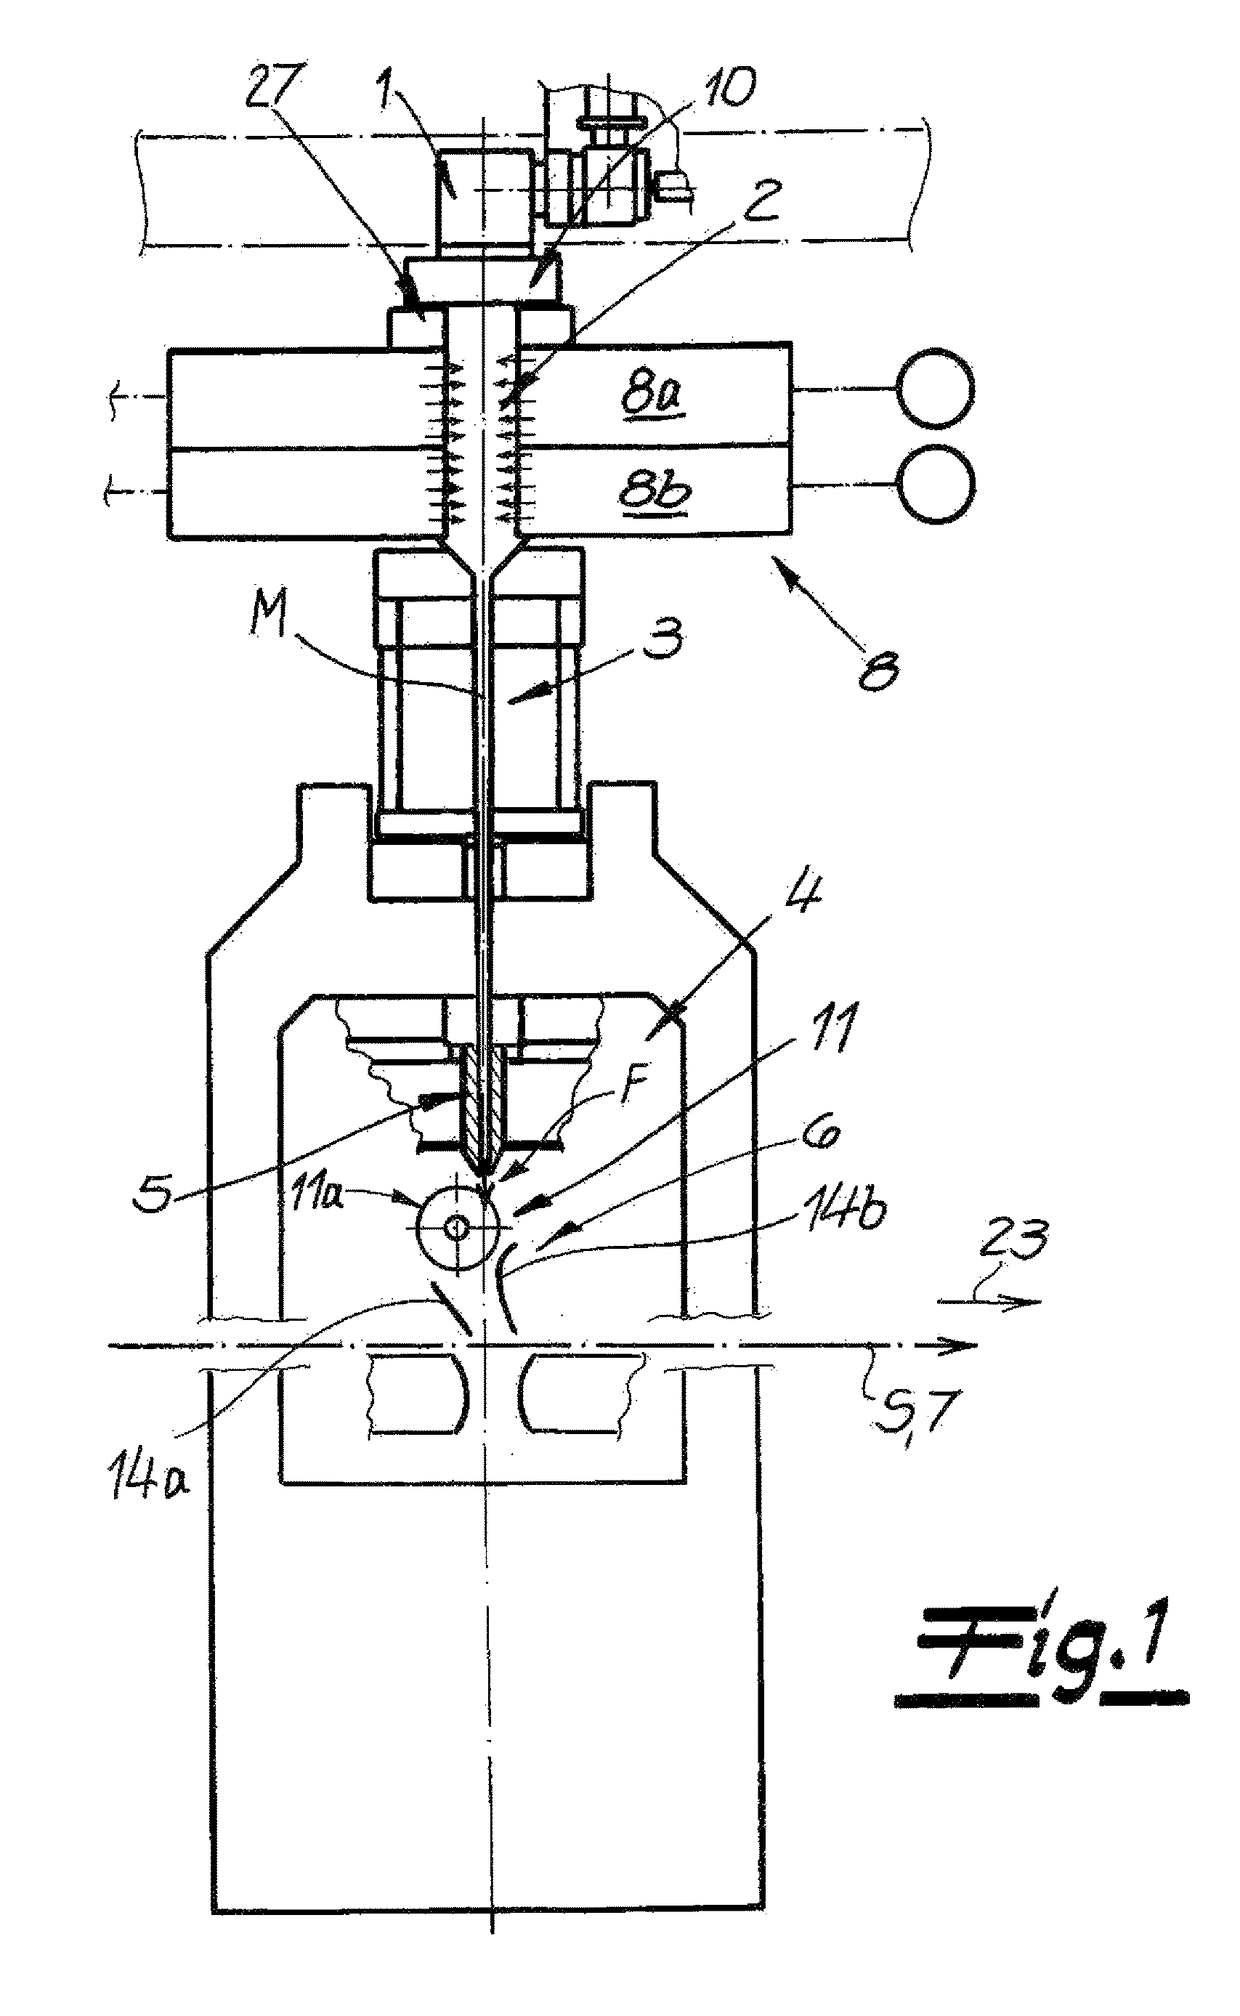 Apparatus for the continuous manufacture of a spunbond web